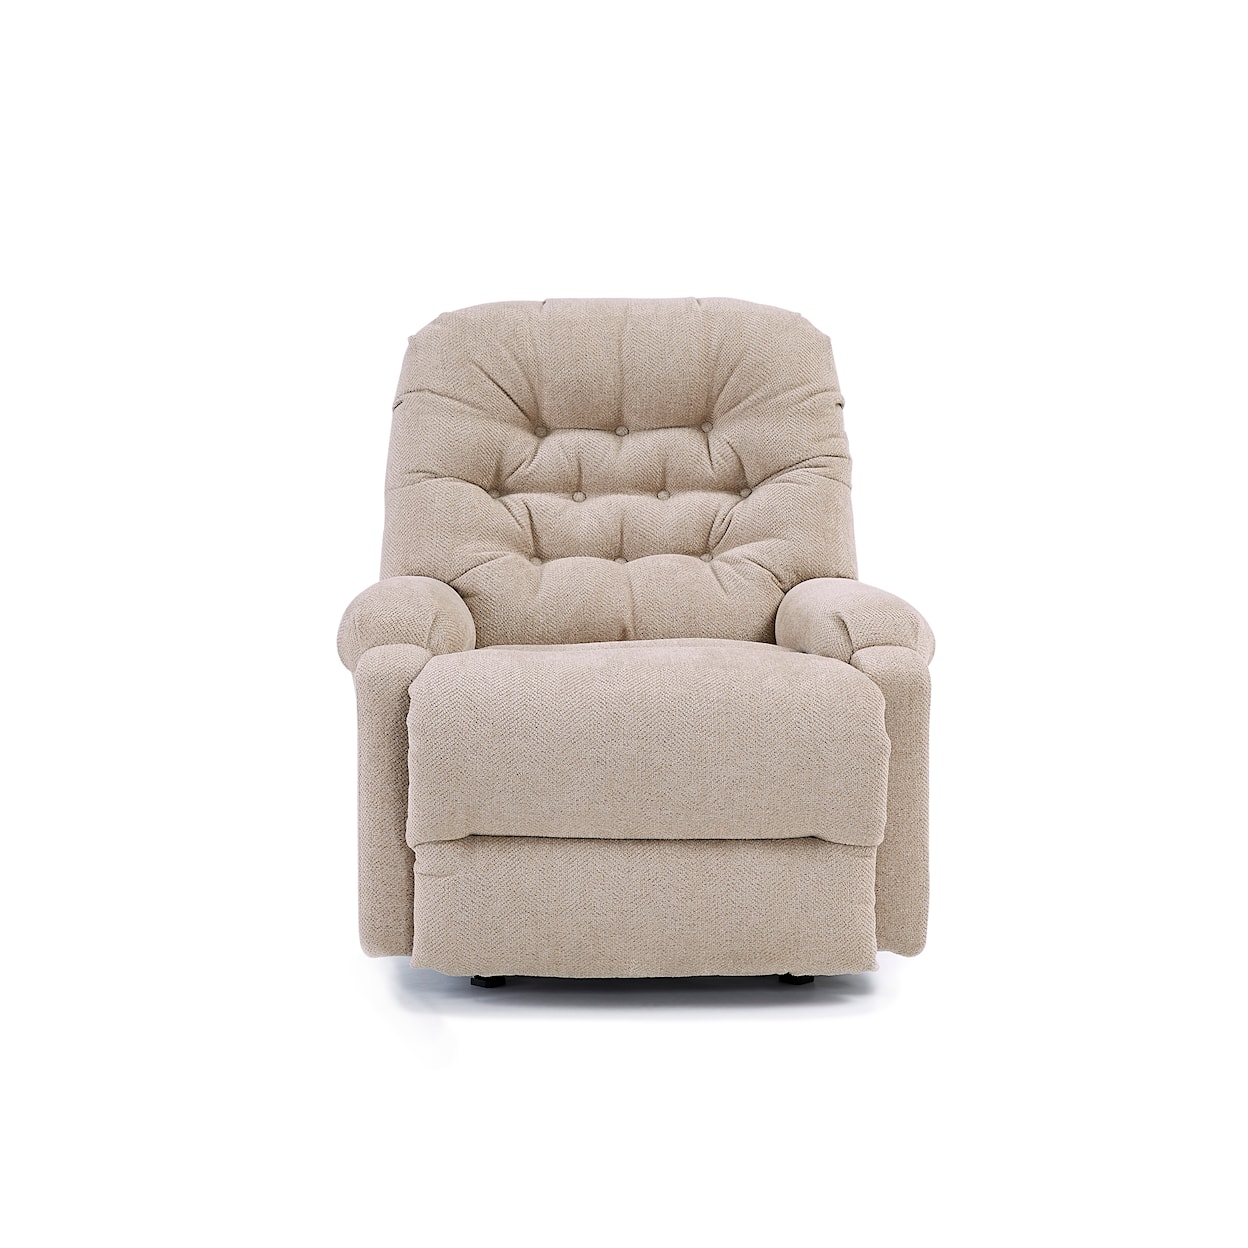 Best Home Furnishings Barb Space Saver Recliner